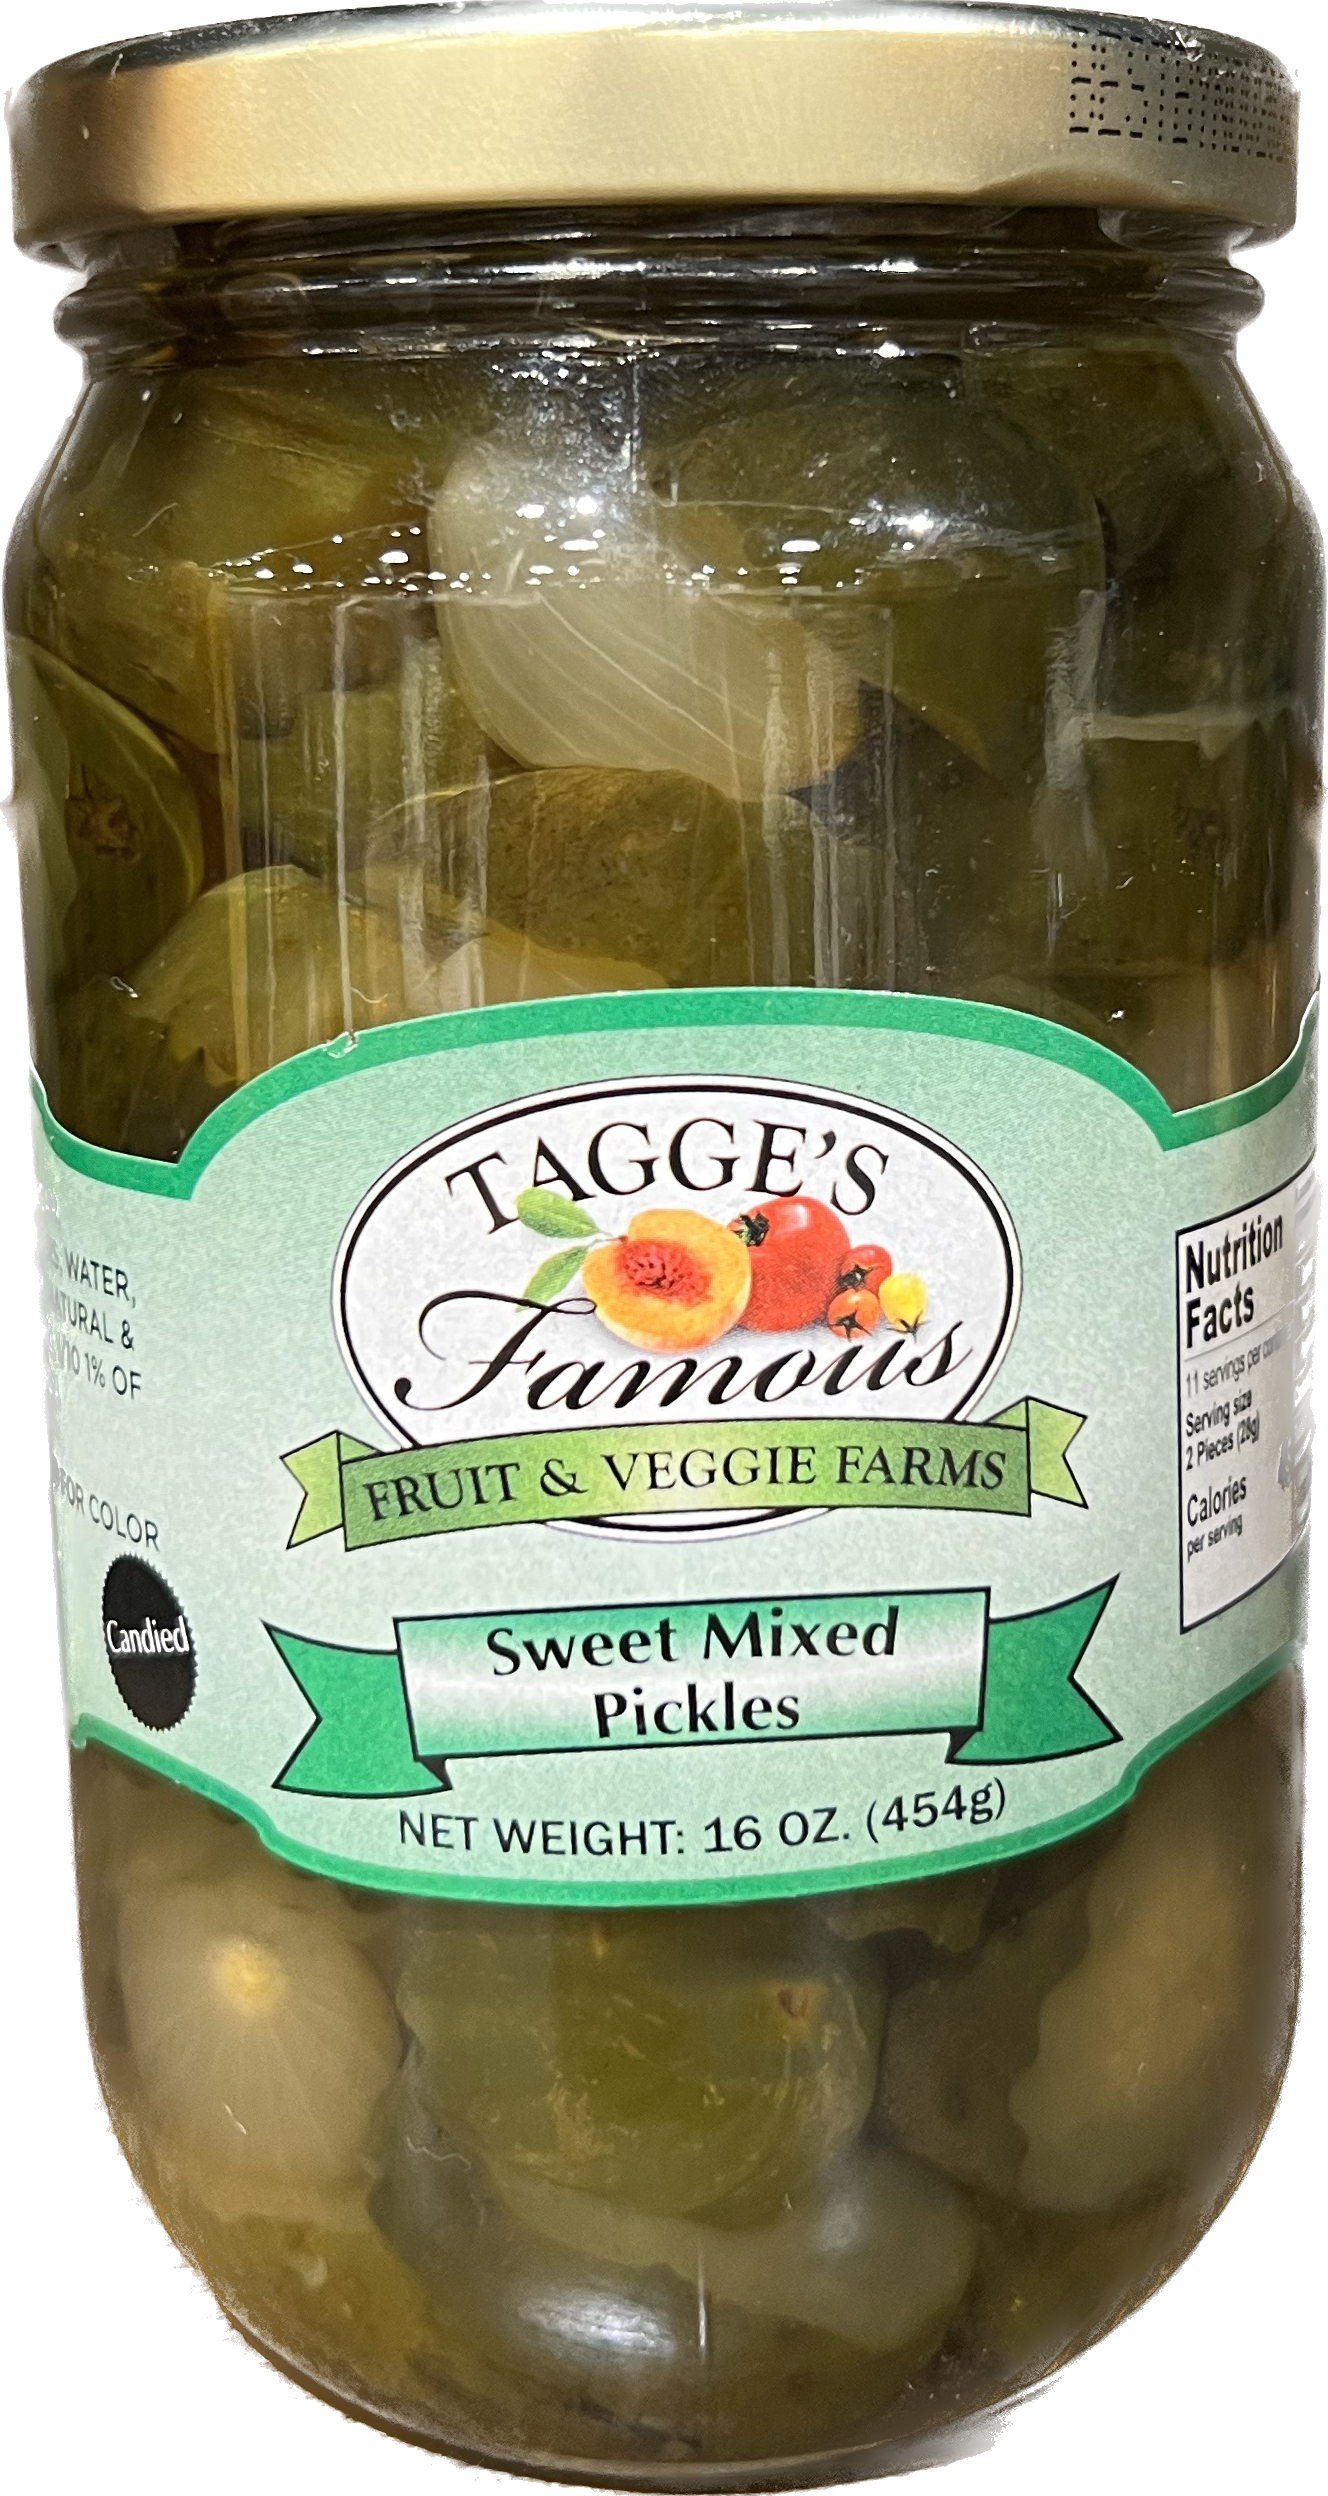 Sweet Mixed Pickles - 16 oz